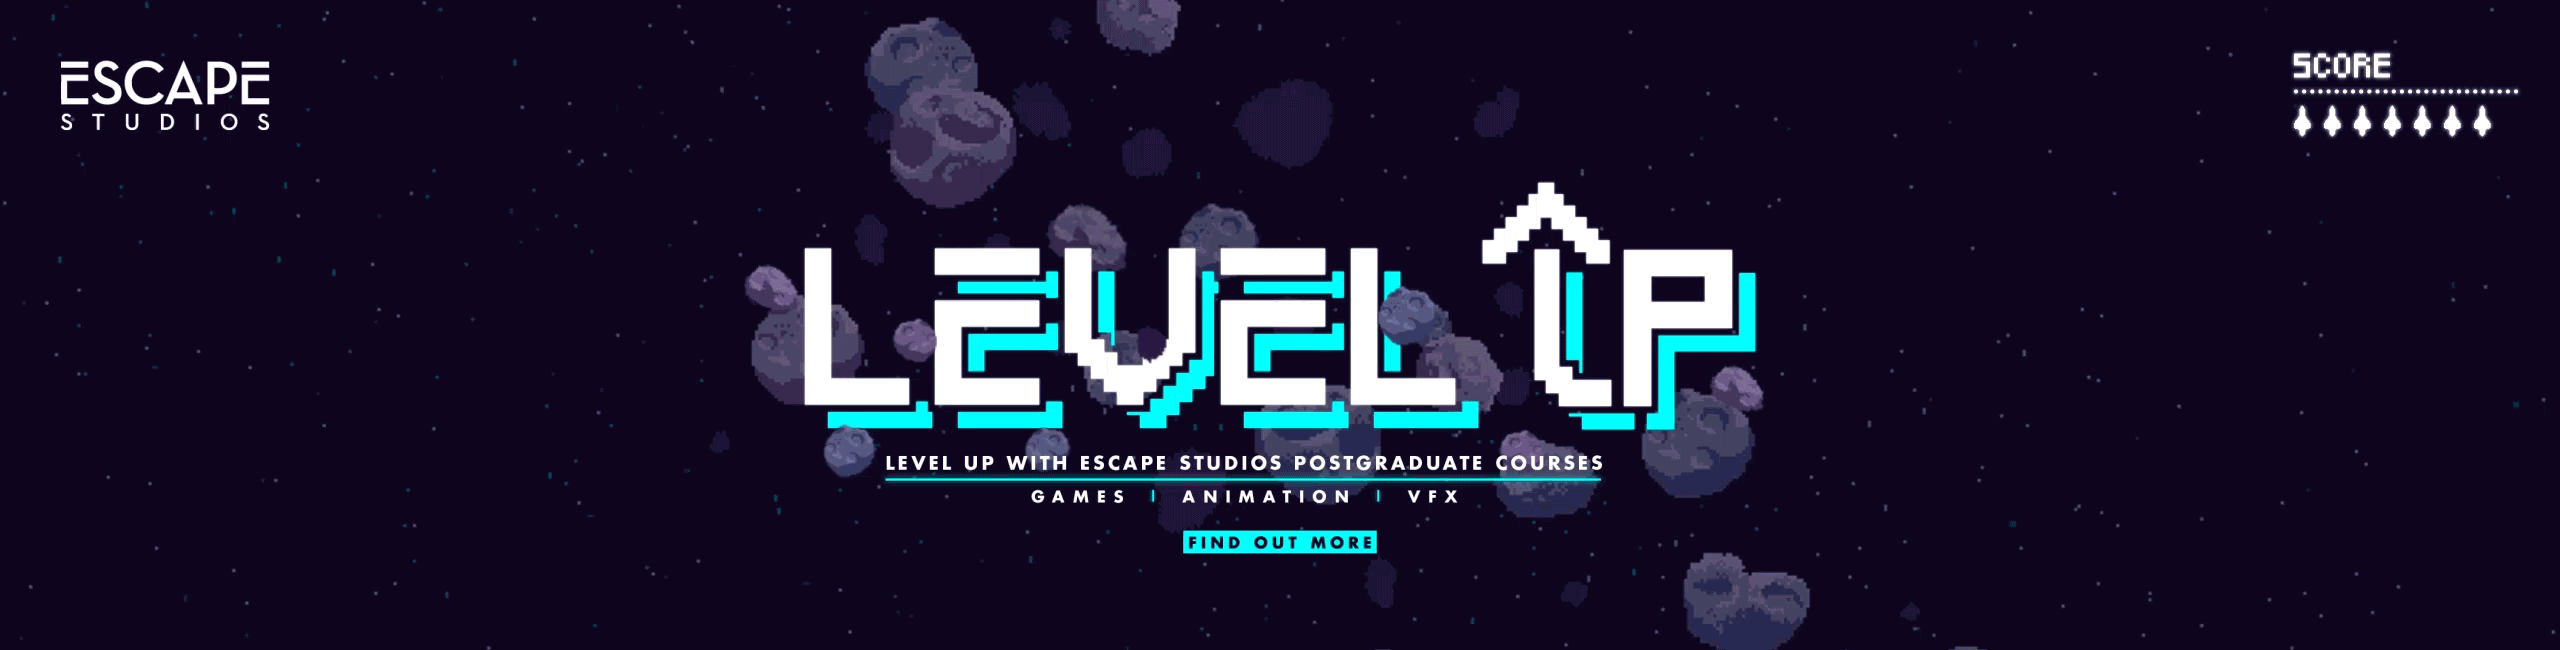 Level Up title in video games style surrounded by spaceships and rockets